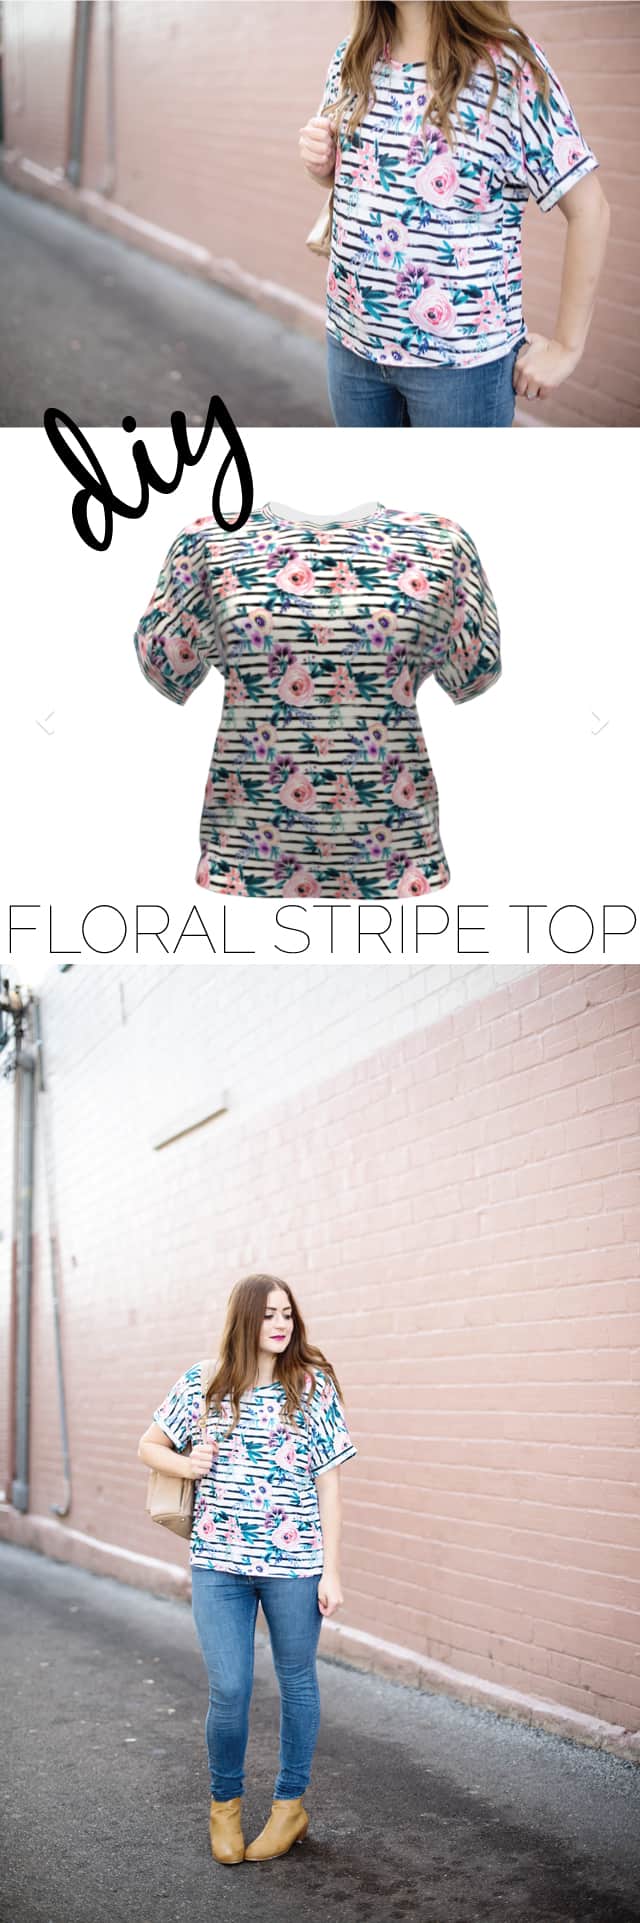 Dreamer Top with Sprout Patterns | DIY Floral Striped Top | diy clothing | handmade clothing | sewing tips and tricks | sewing patterns | sewing tutorials || See Kate Sew #sewingpatterns #floralstripedtop #diyclothing